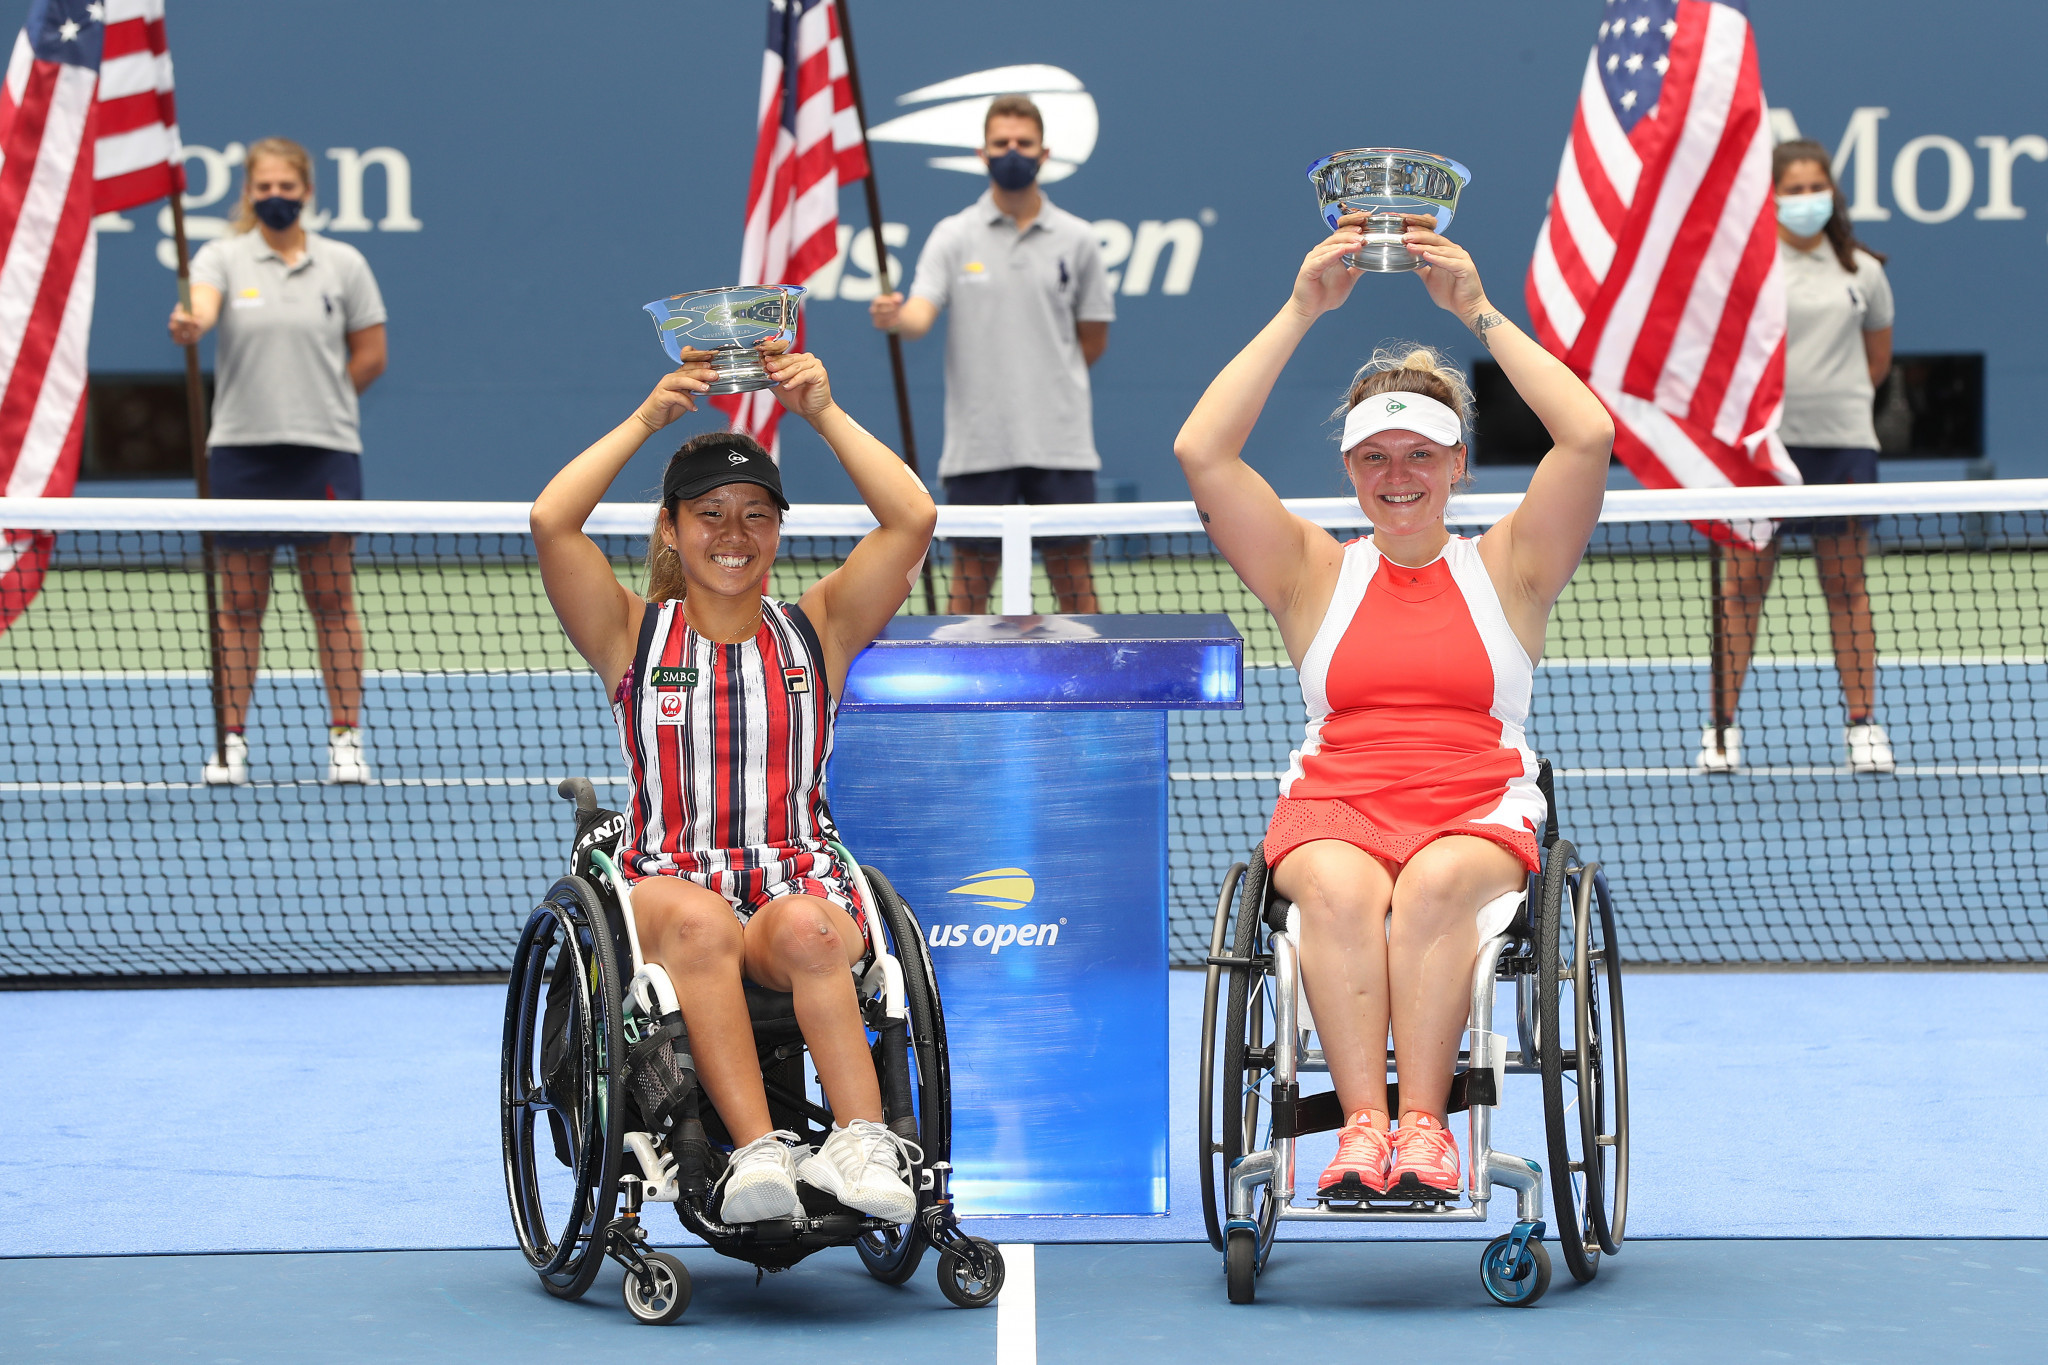 Yui Kamiji (left) and her partner Jordanne Whiley won the women's wheelchair doubles title after beating Dutch top seeds Buis and de Groot ©Getty Images